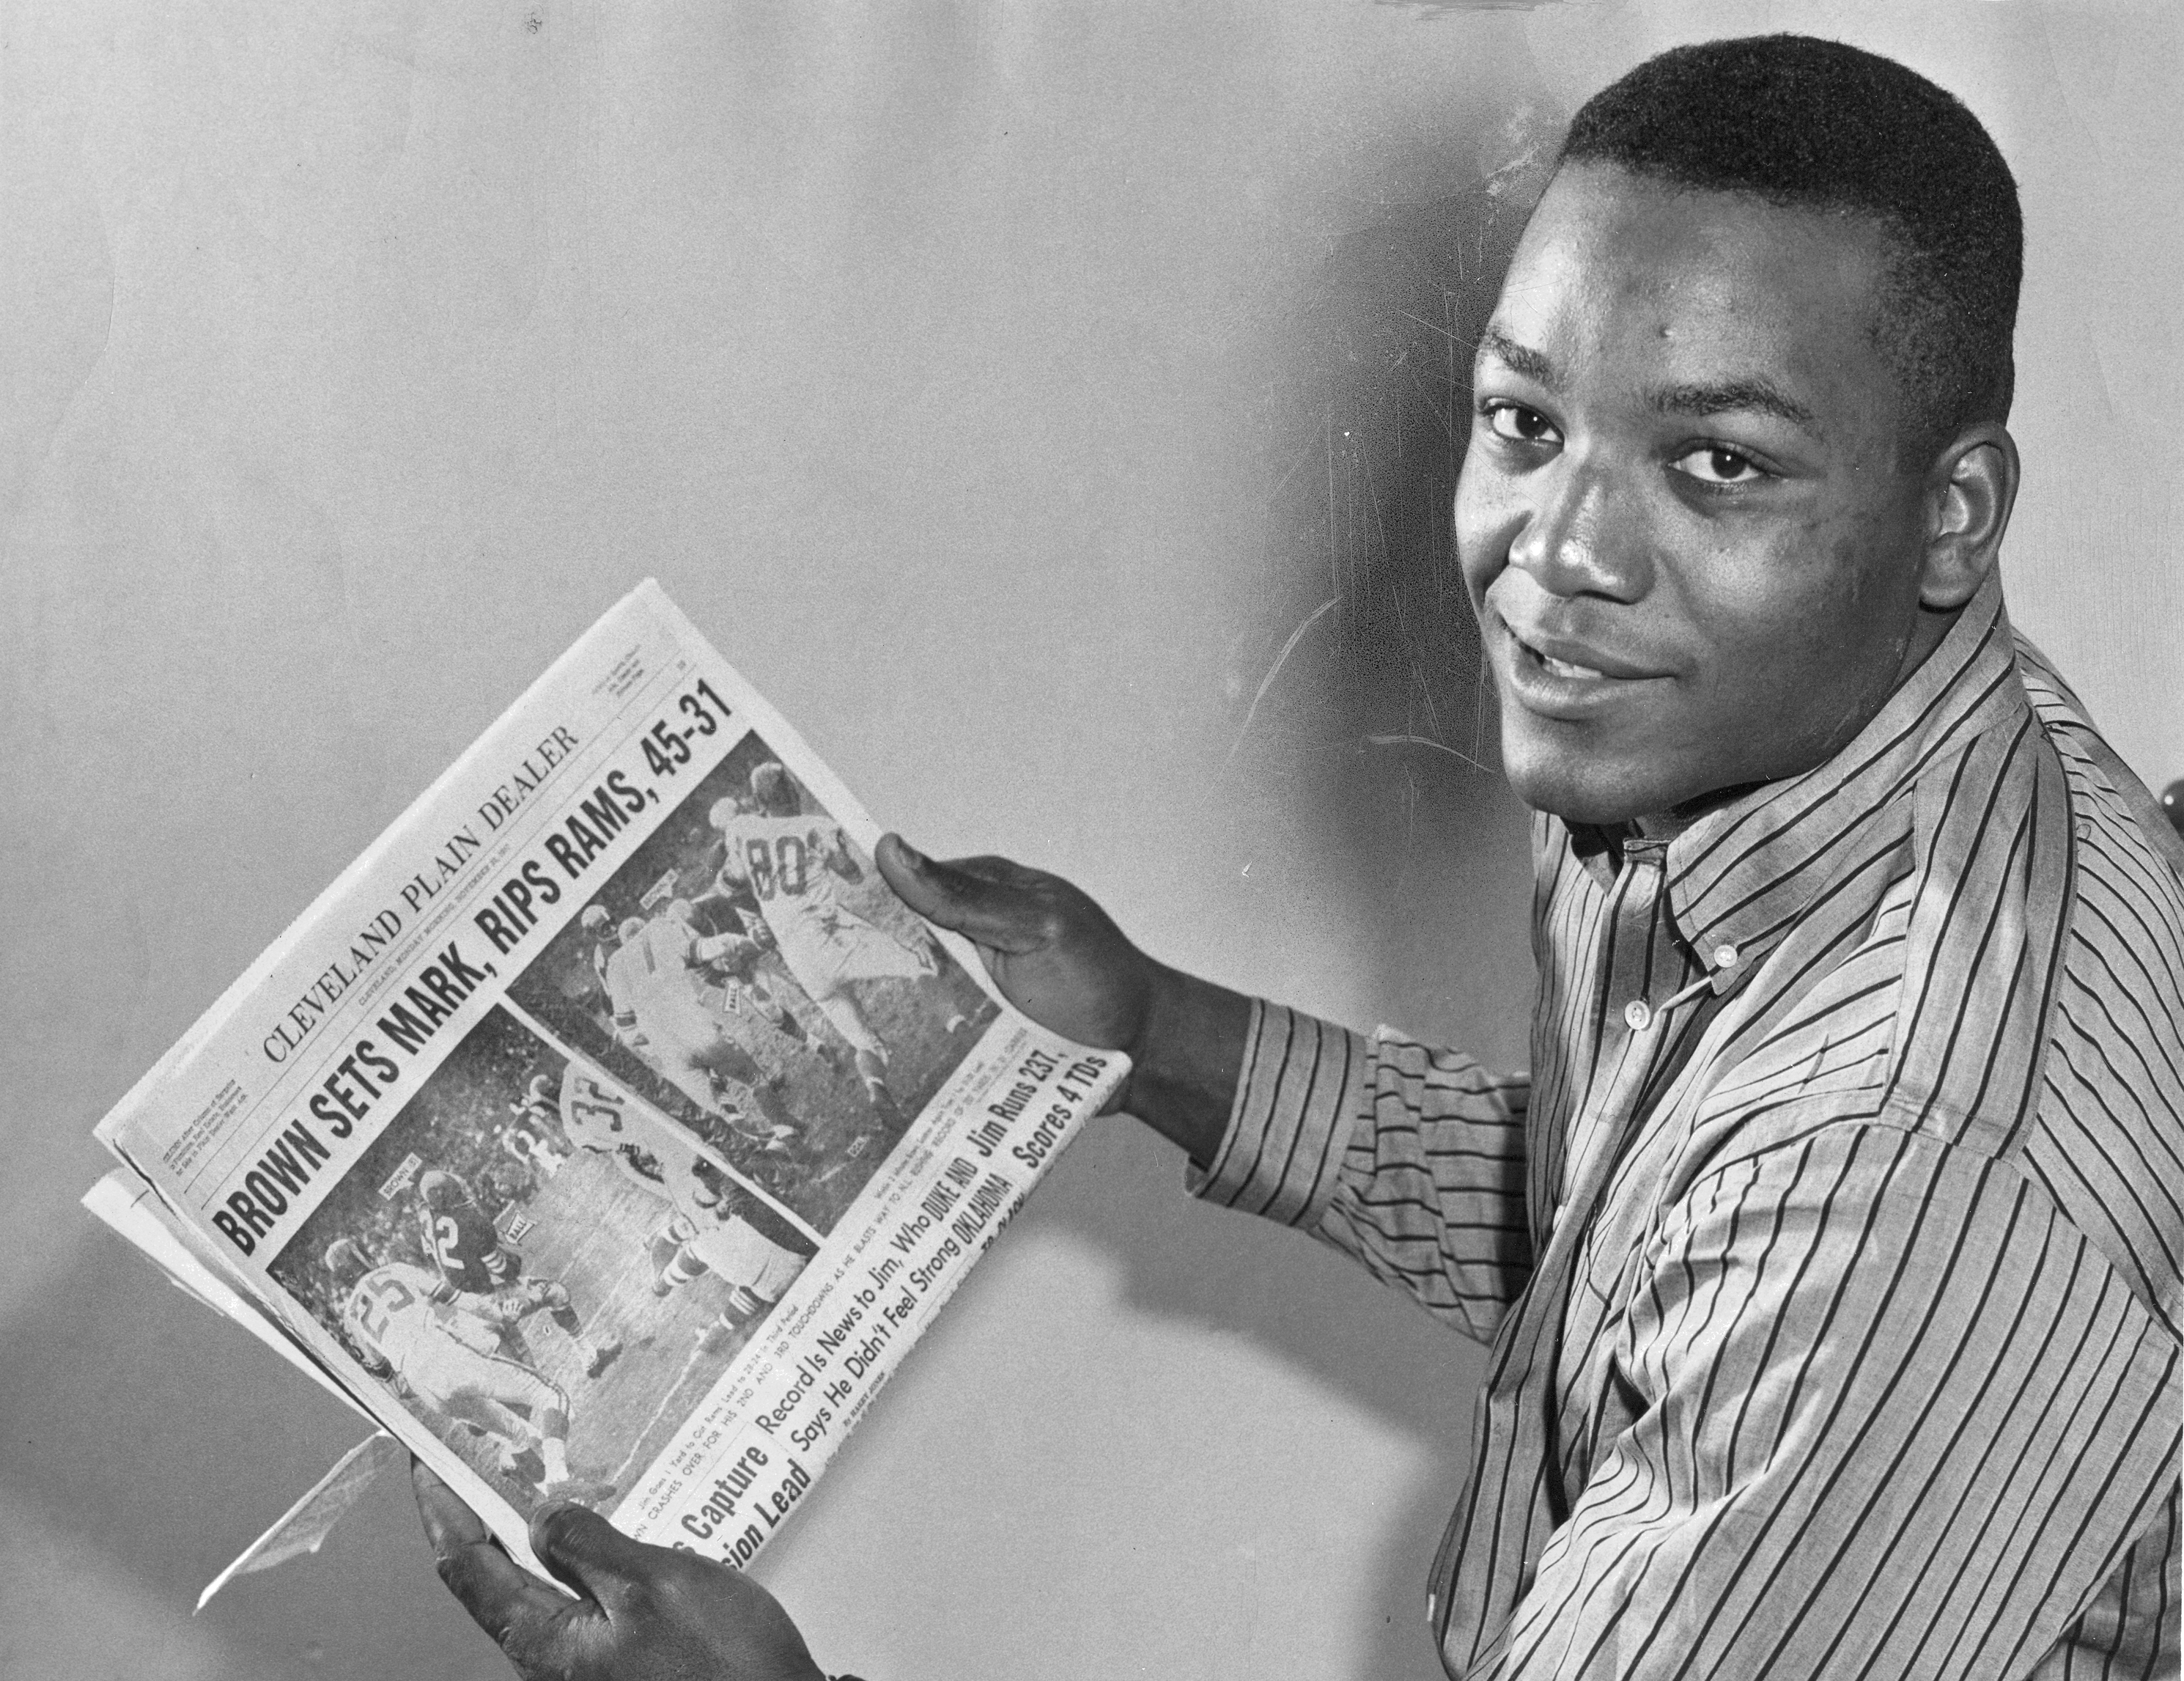 PDHST PLAIN DEALER HISTORICAL PHOTOGRAPH COLLECTION: CLEVELAND BROWNS

Jim Brown holds up a copy of the Cleveland Plain Dealer from November 25, 1957.



NOTES FROM GAME STORY:

Brown Sets Mark , Rips Rams, 45-31 

Jim Runs 237, Scores 4 TDs 

November 24, 1957

Browns 45, Los Angeles Rams 31 

Cleveland Municipal Stadium 



Jim Brown took personal charge of the Browns' offense yesterday at the Stadium. 



Before an amazed crowd of 65,407, largest turnout here since 1953, the rookie fullback from Syracuse gave a tremendous exhibition of running. 



Brown scored four touchdowns, one on a 69-yard jaunt, and accumulated 237 yards for a new National League record as the surprising Browns smashed the Los Angeles Rams, 45-31, to remain on top in the Eastern Division.